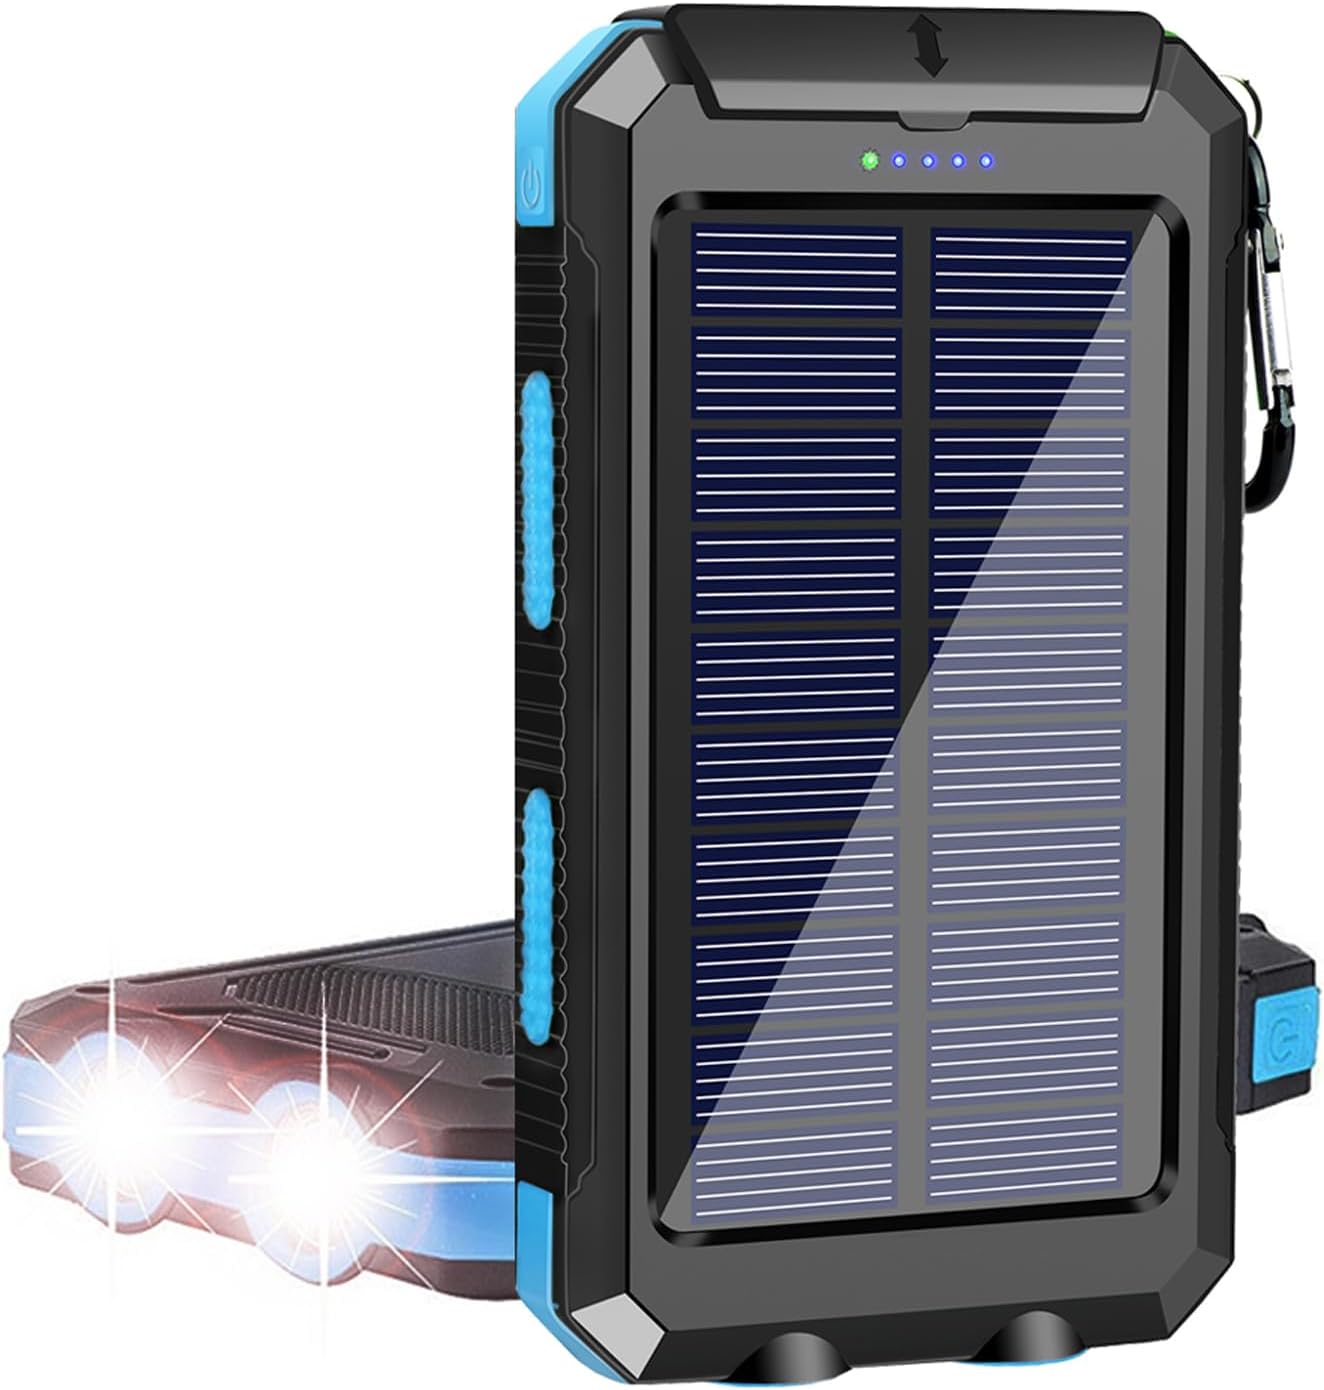 Portable Solar Power Bank for All Cellphones, Waterproof Battery Pack, Outdoor External Backup Power Charger Dual USB 5V Outputs/Led Flashlights, Perfect for Camping Travel